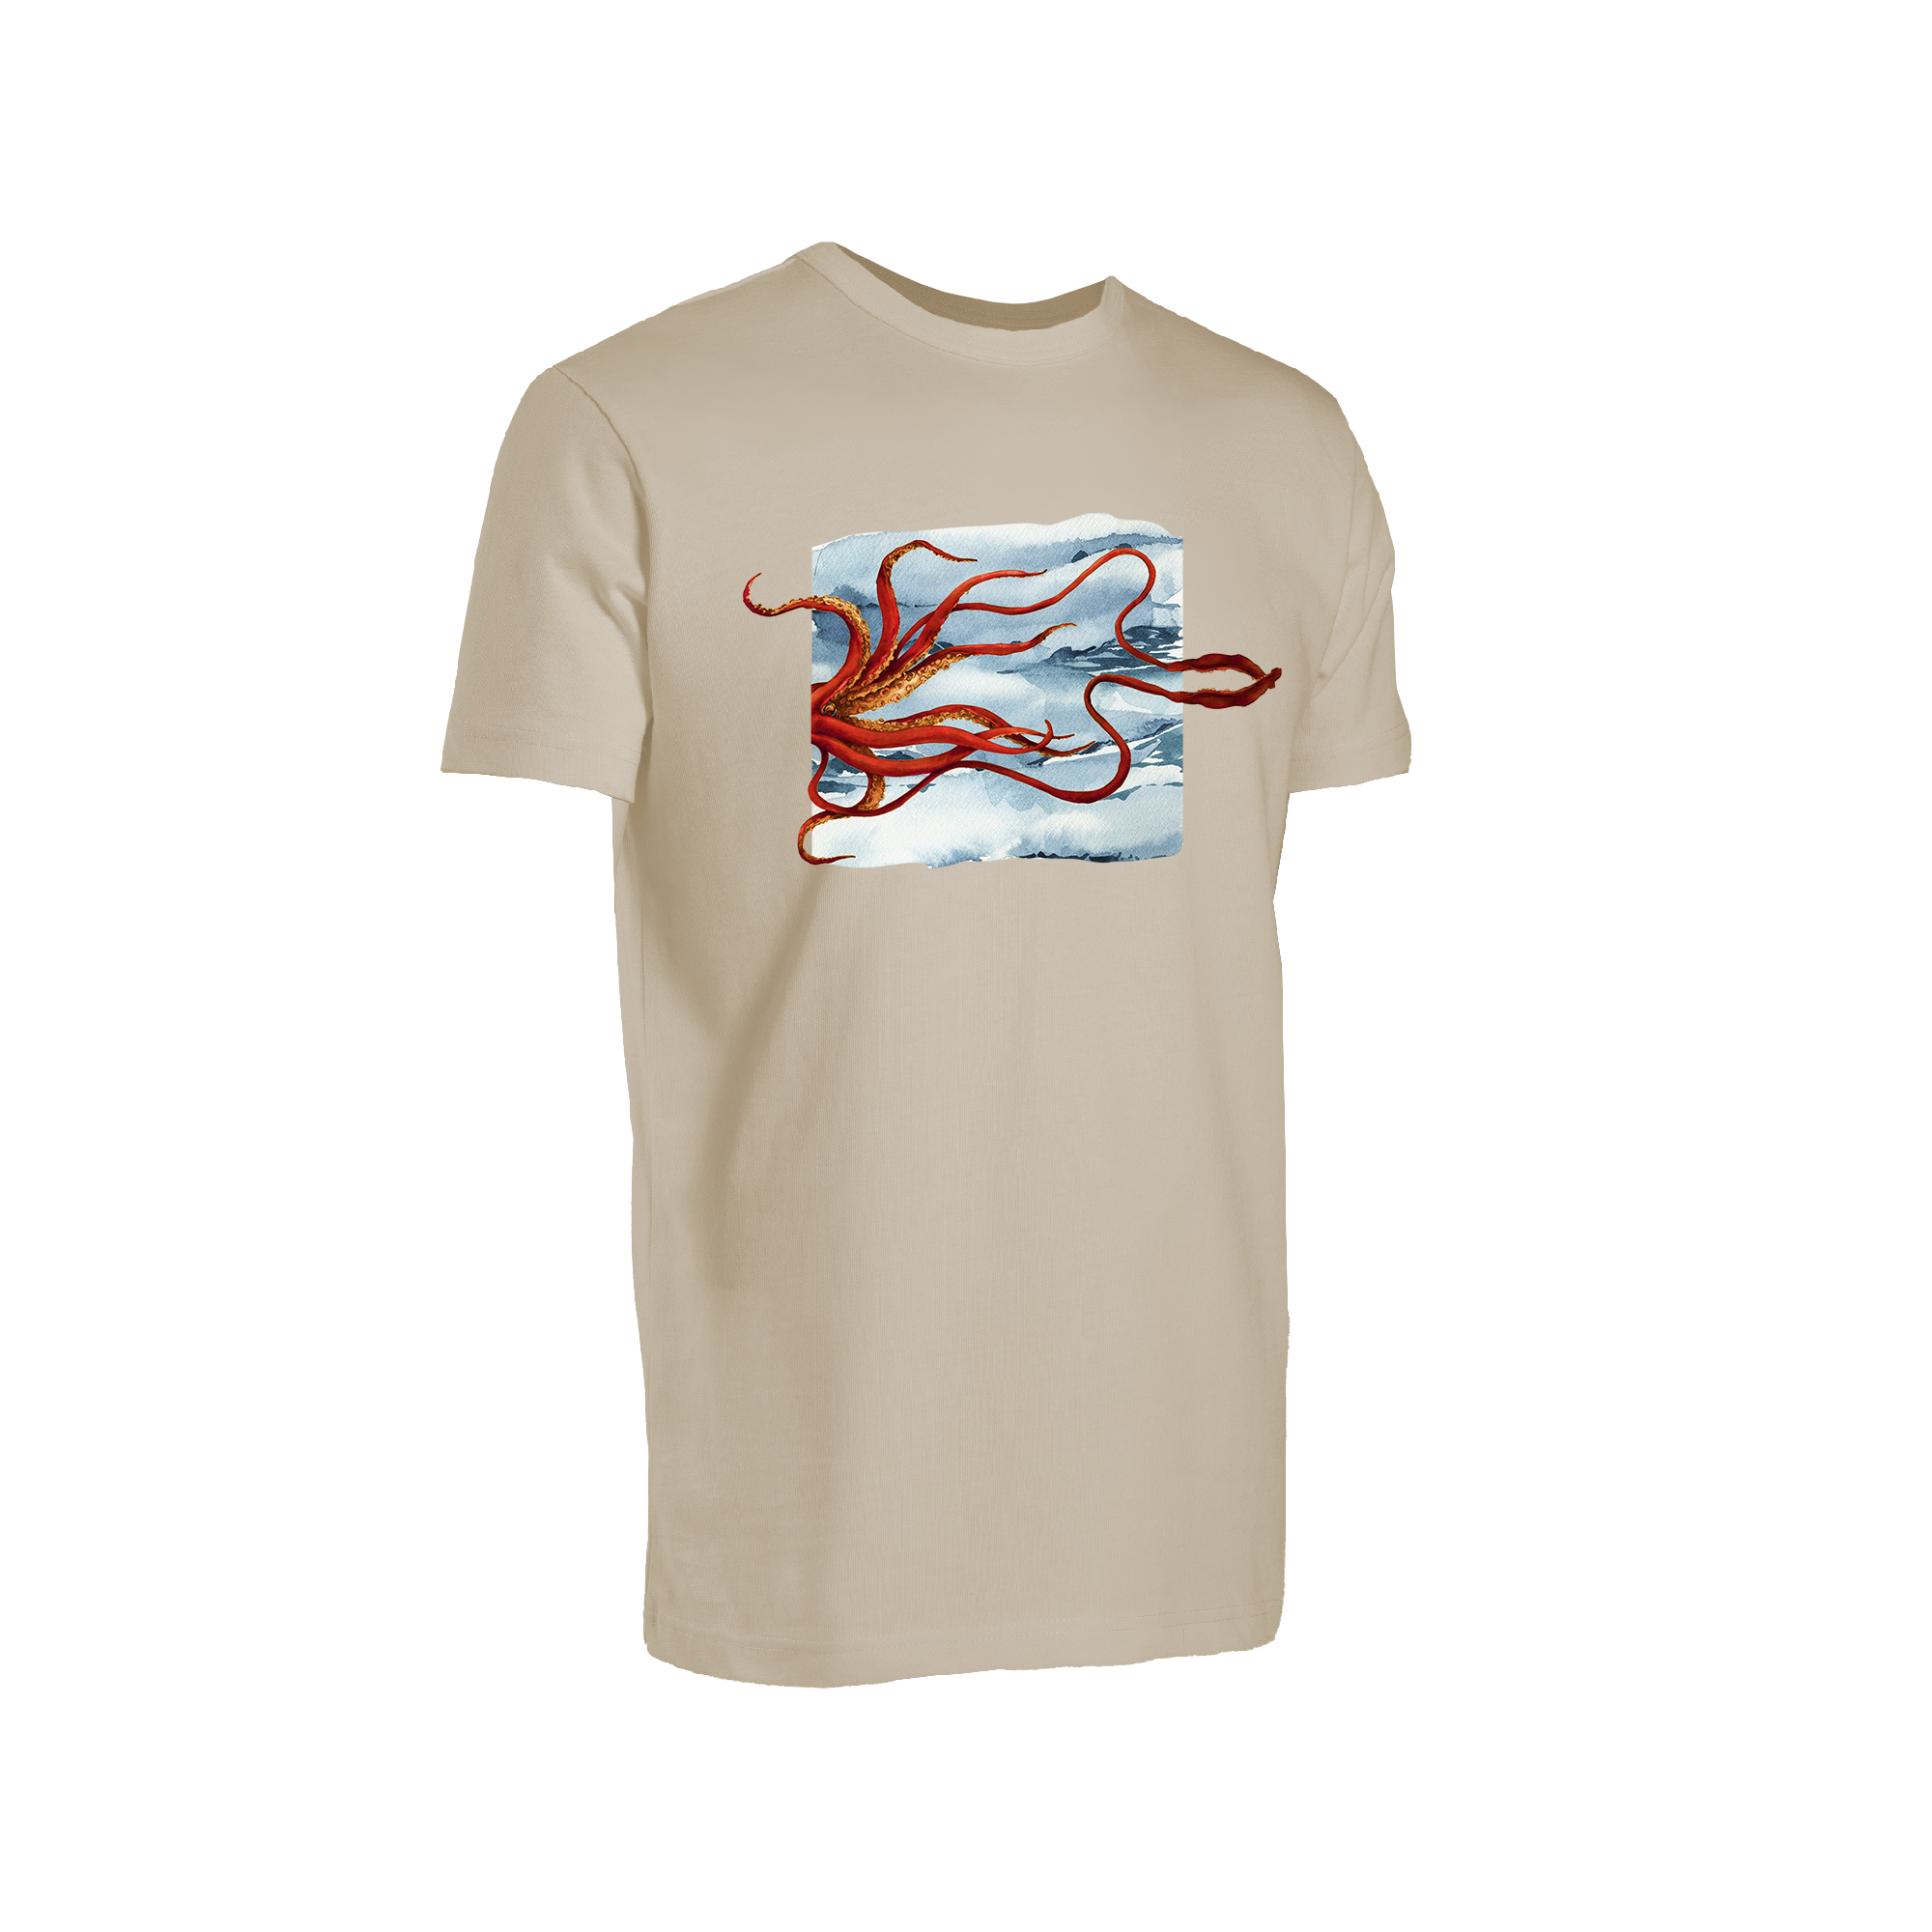 Graphite Short Sleeve Crew Neck T-Shirt Giant Squid Patterned